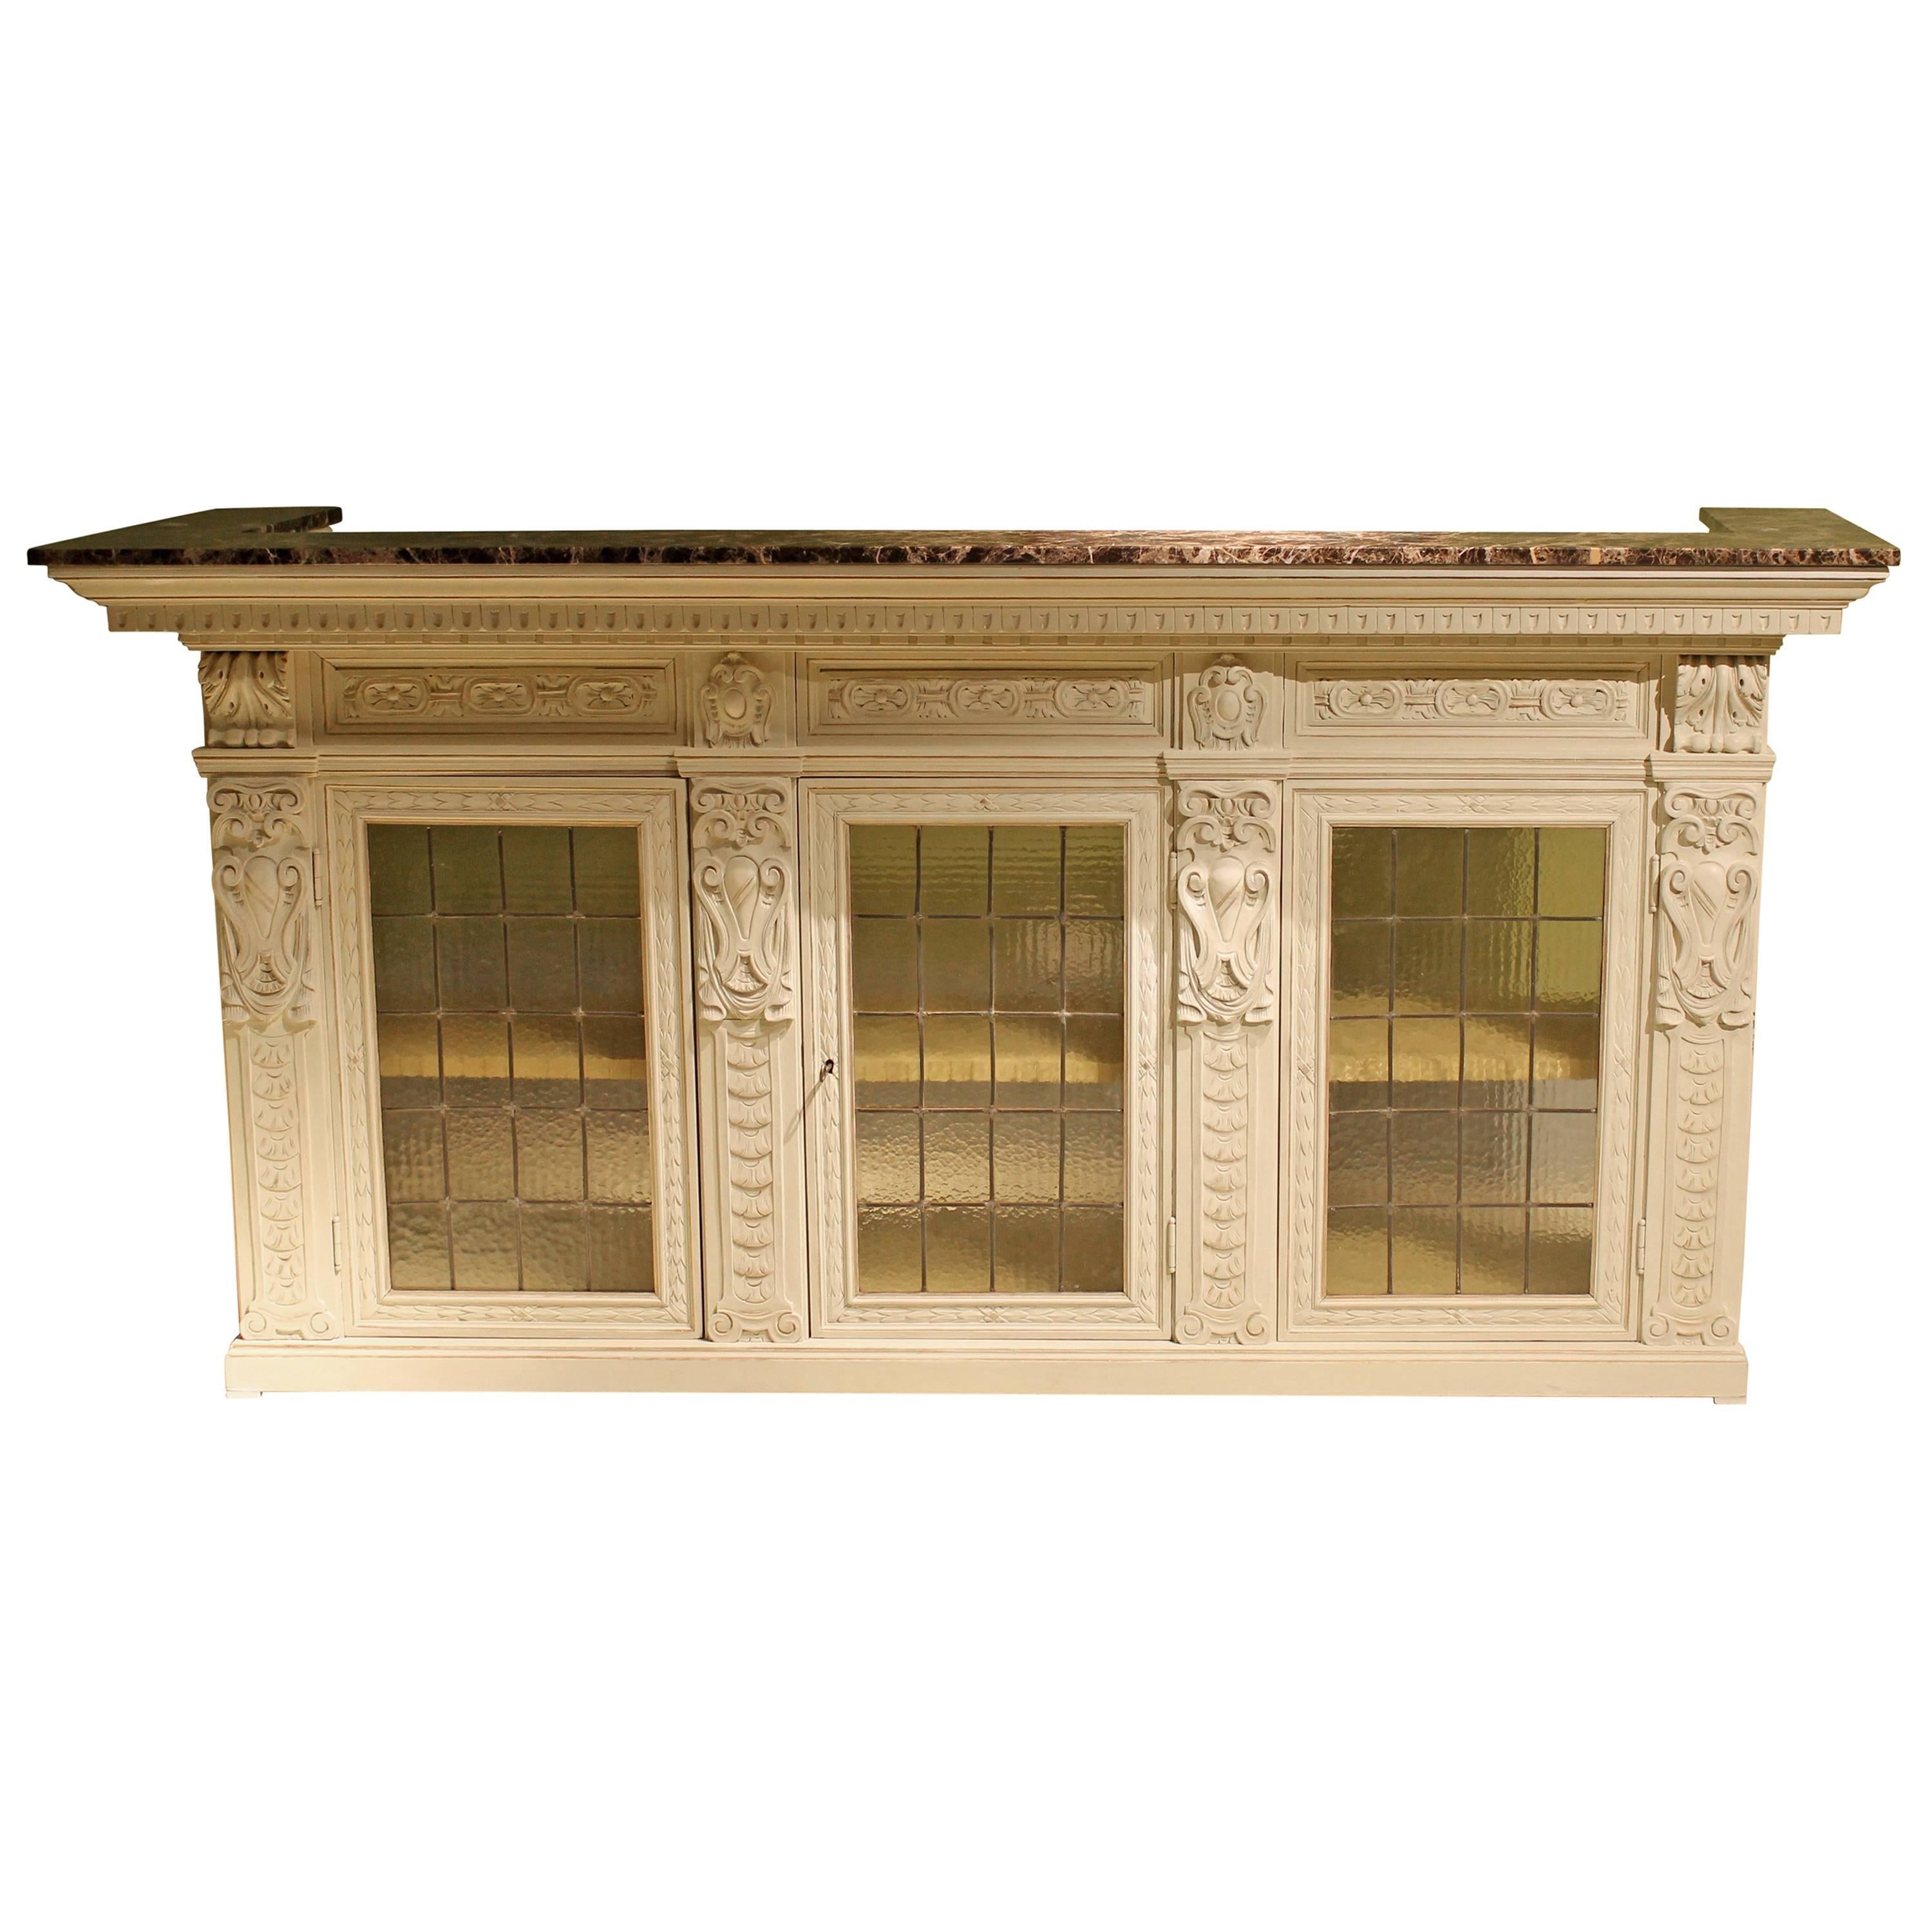 Italian Renaissance Revival Cream and Gold Lacquer Bar Counter with Marble Top